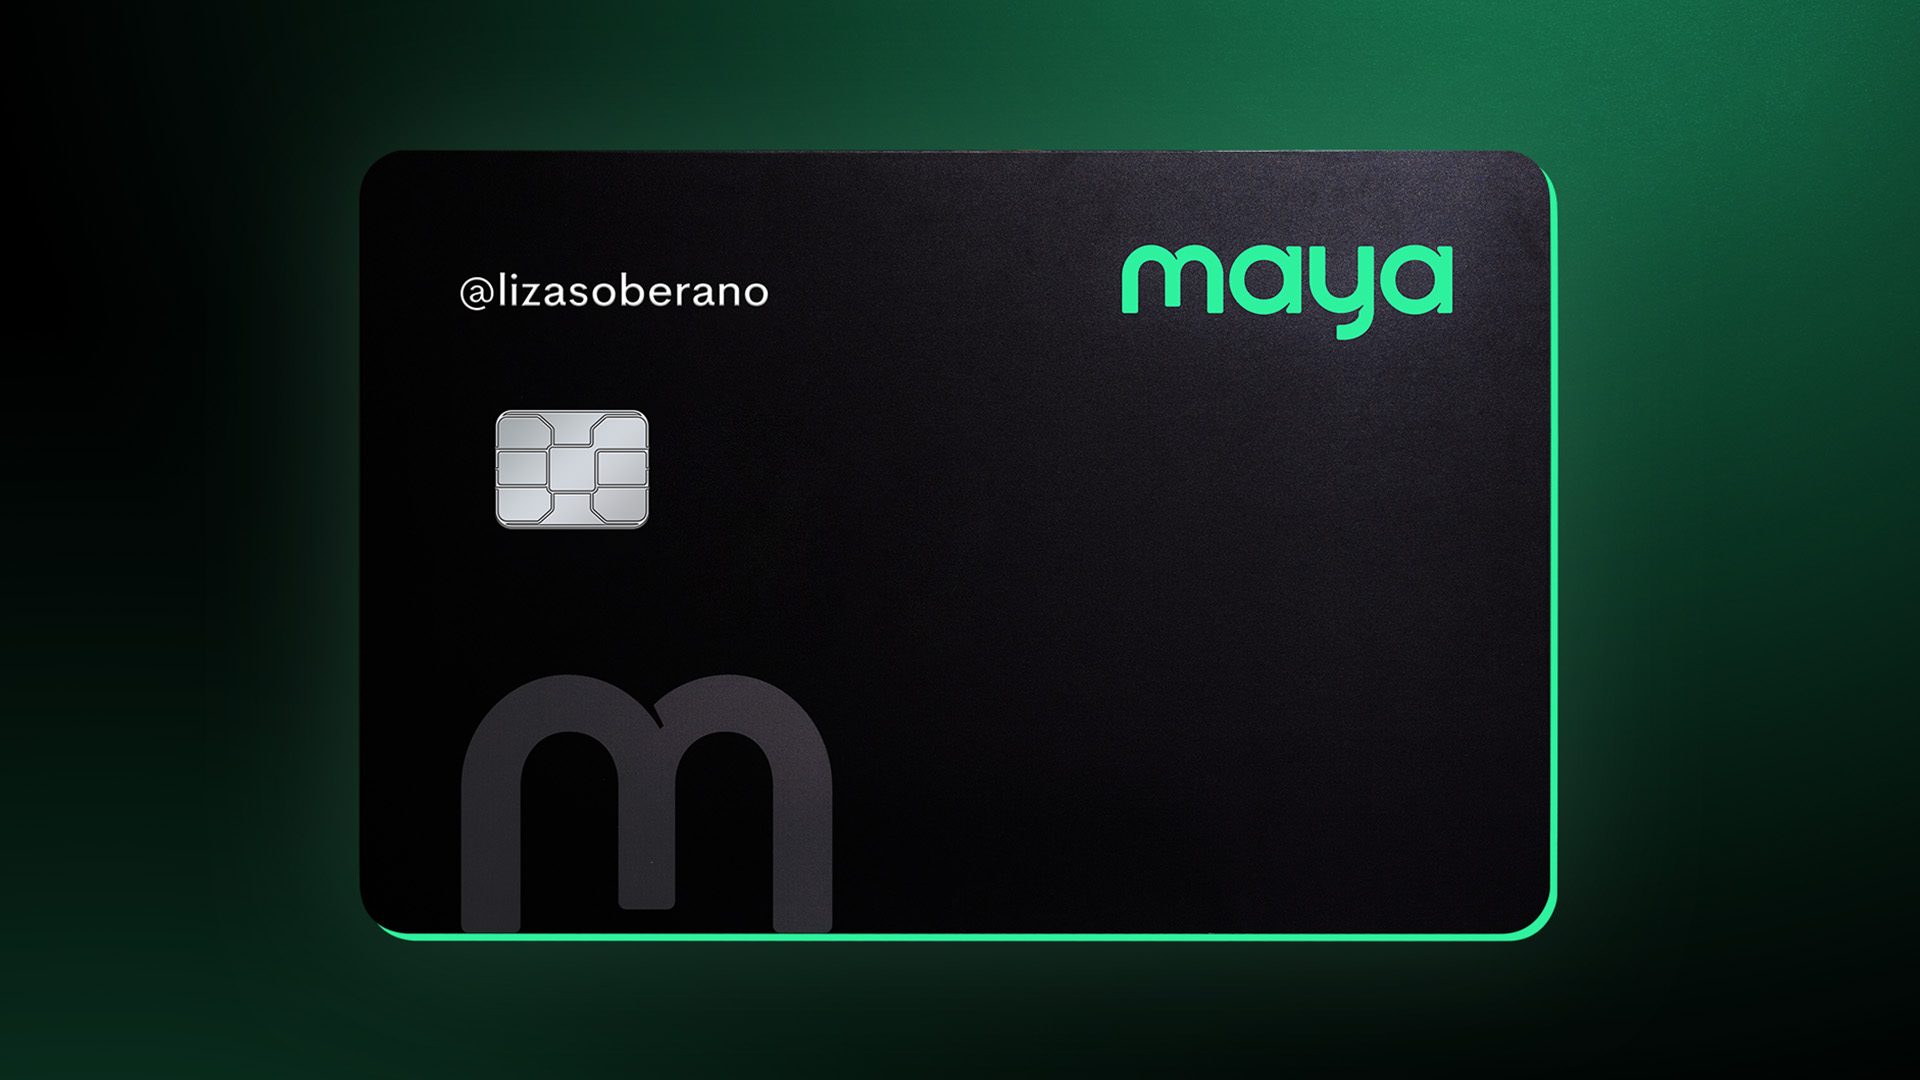 Visa names Maya as top prepaid card issuer in the Philippines once more